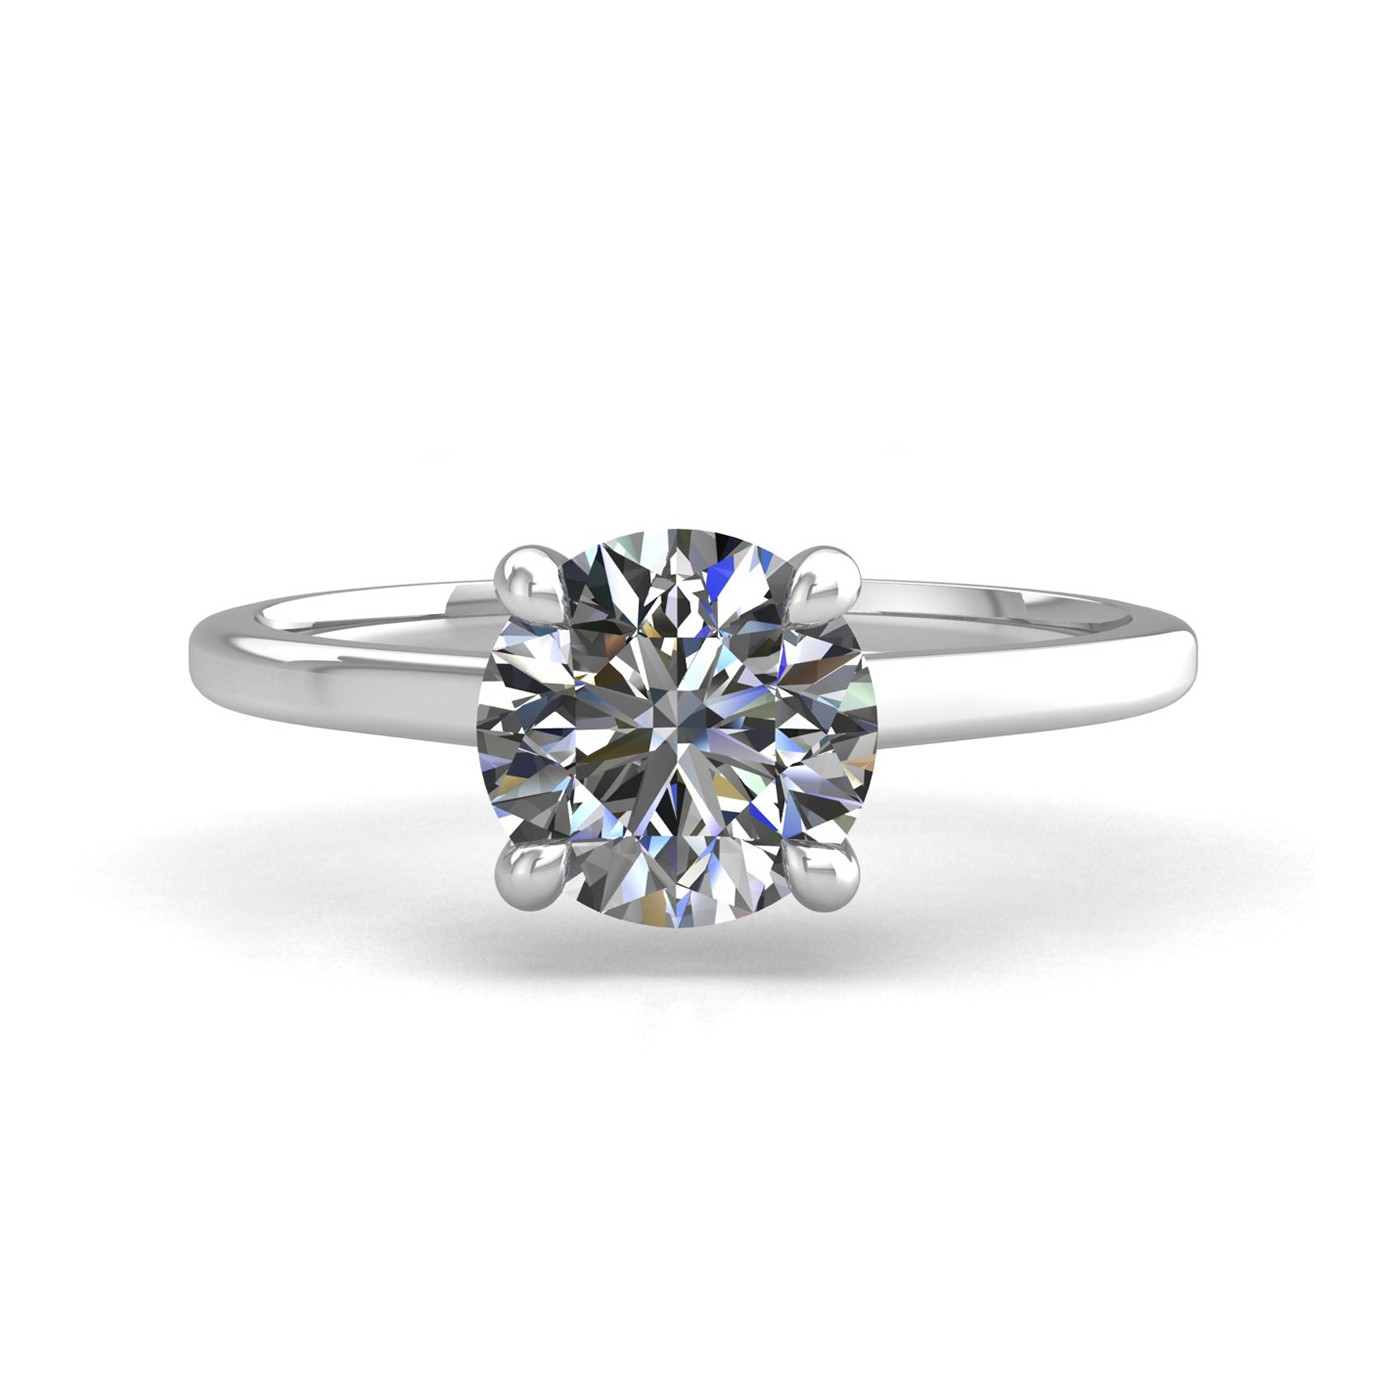 18k white gold 1.0ct 4 prongs solitaire round cut diamond engagement ring with whisper thin band